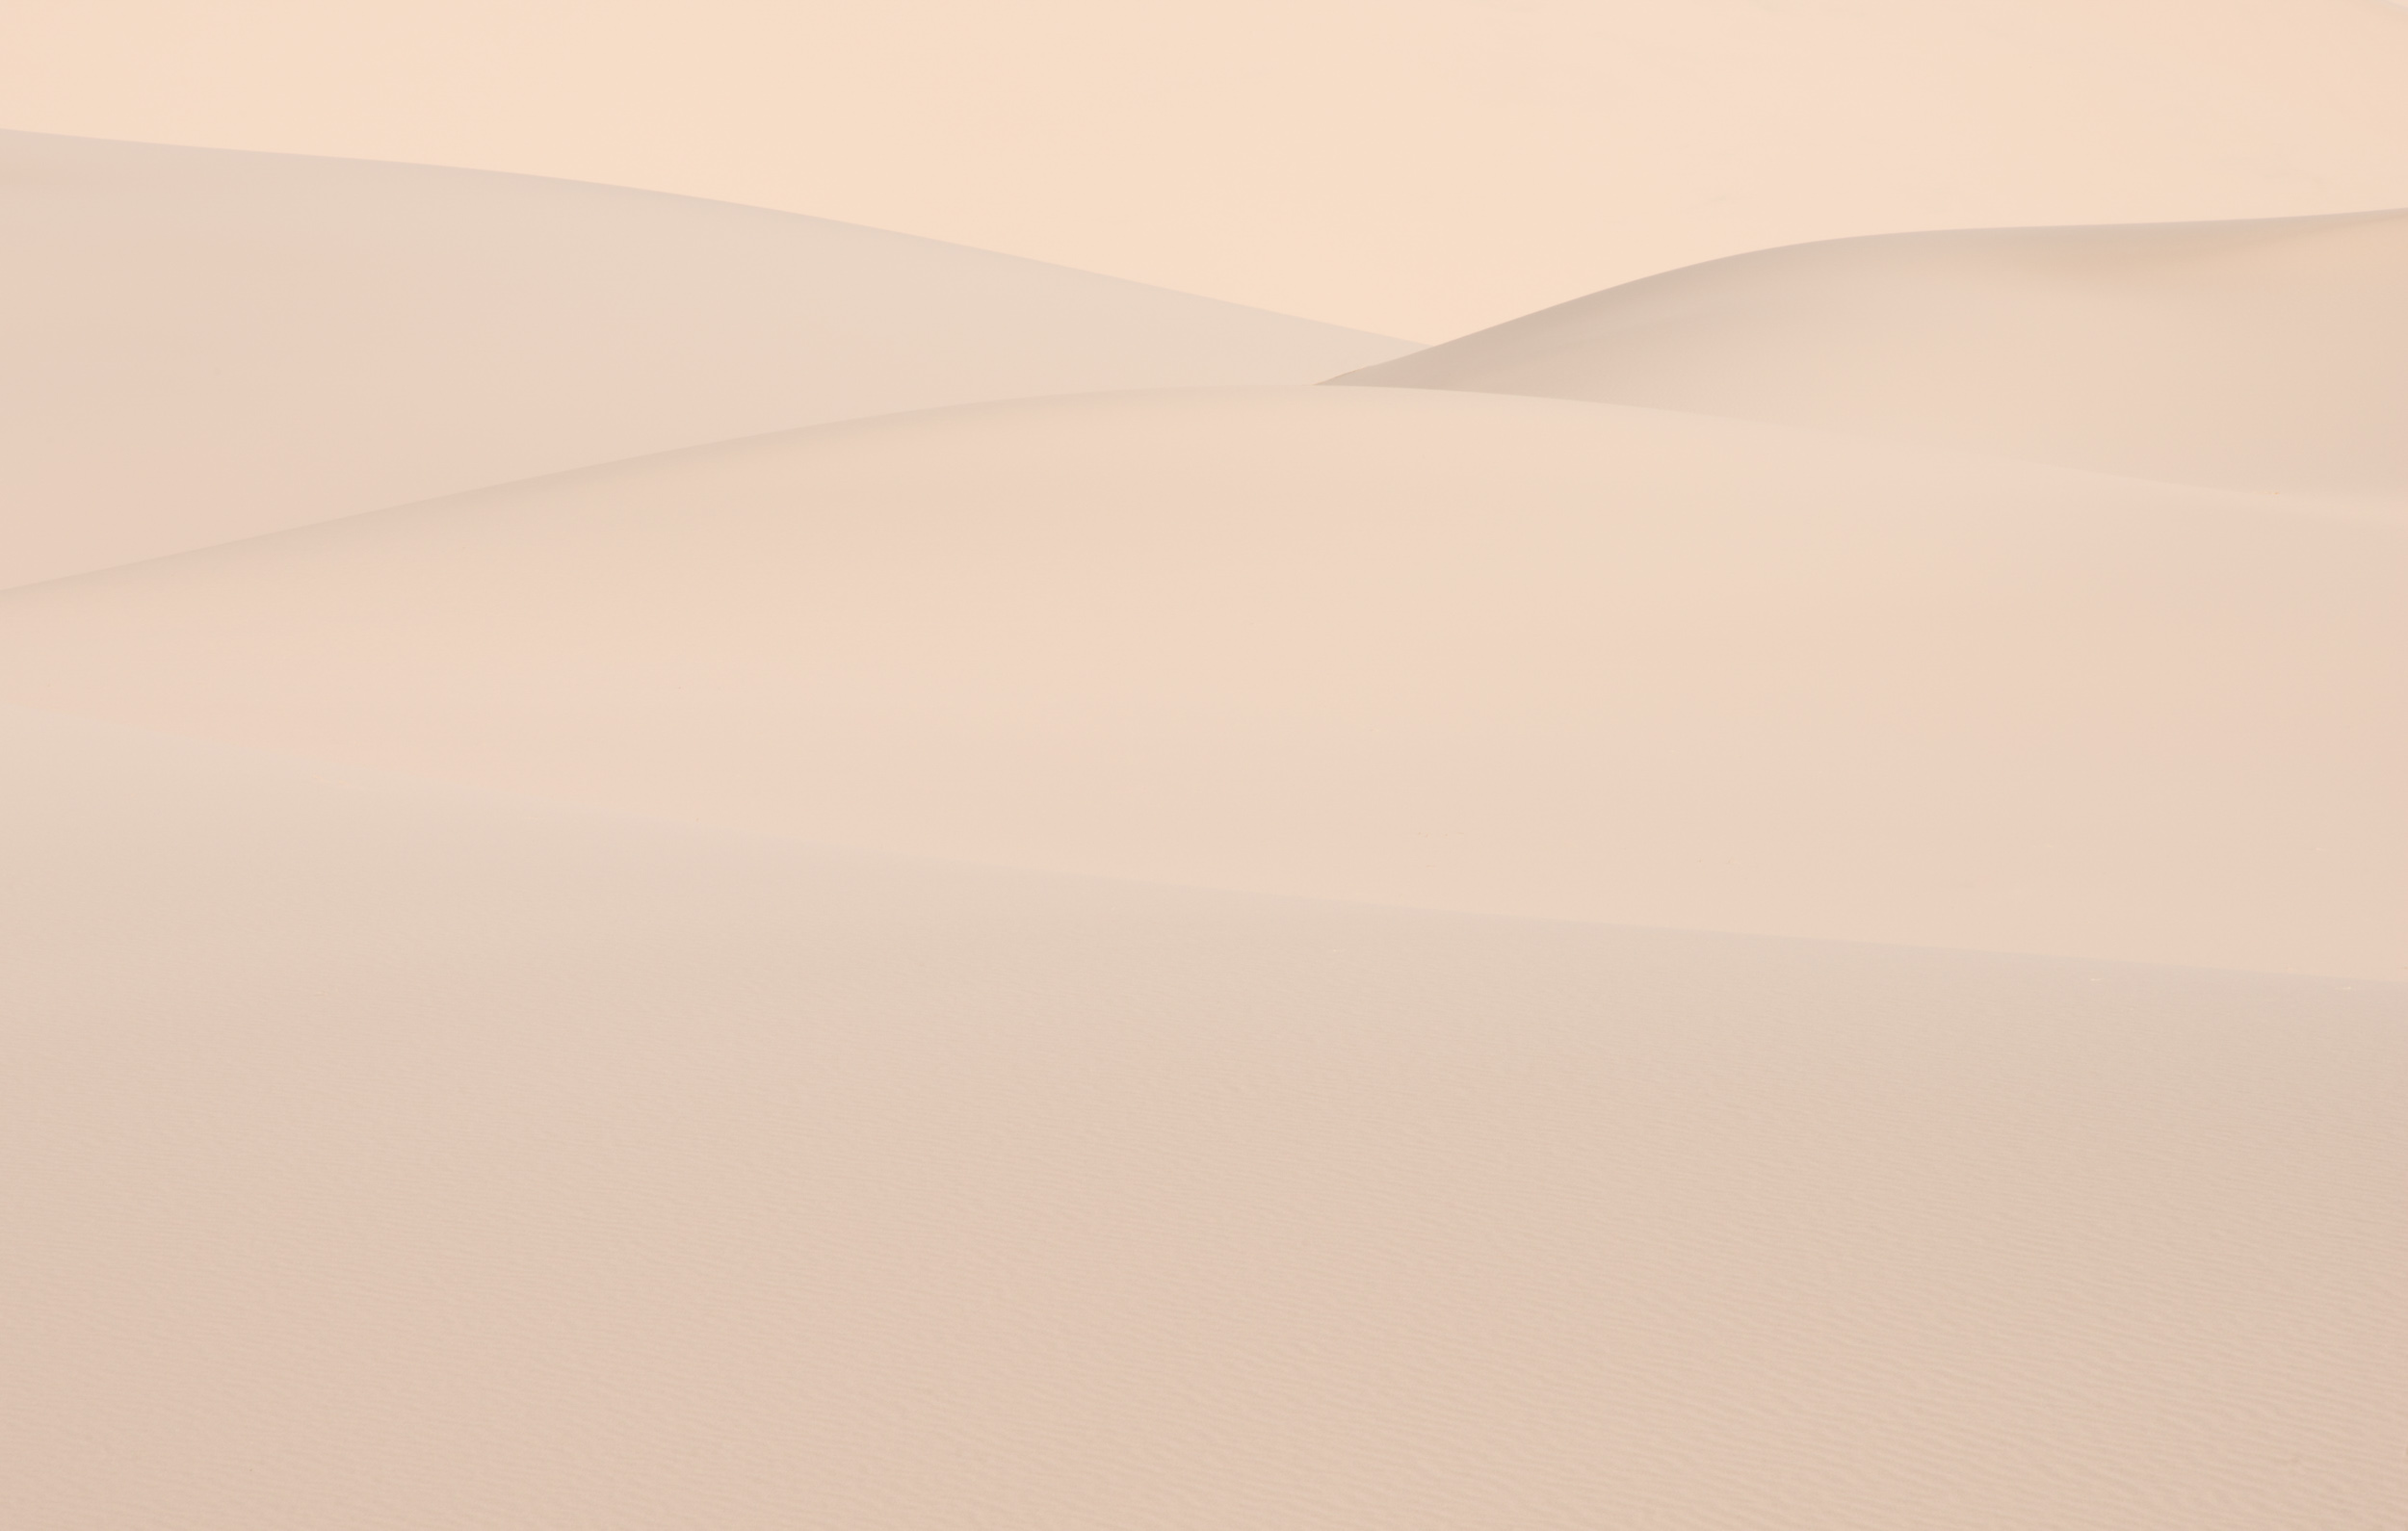 Abstract series on the Eureka Dunes in Death Valley National Park.